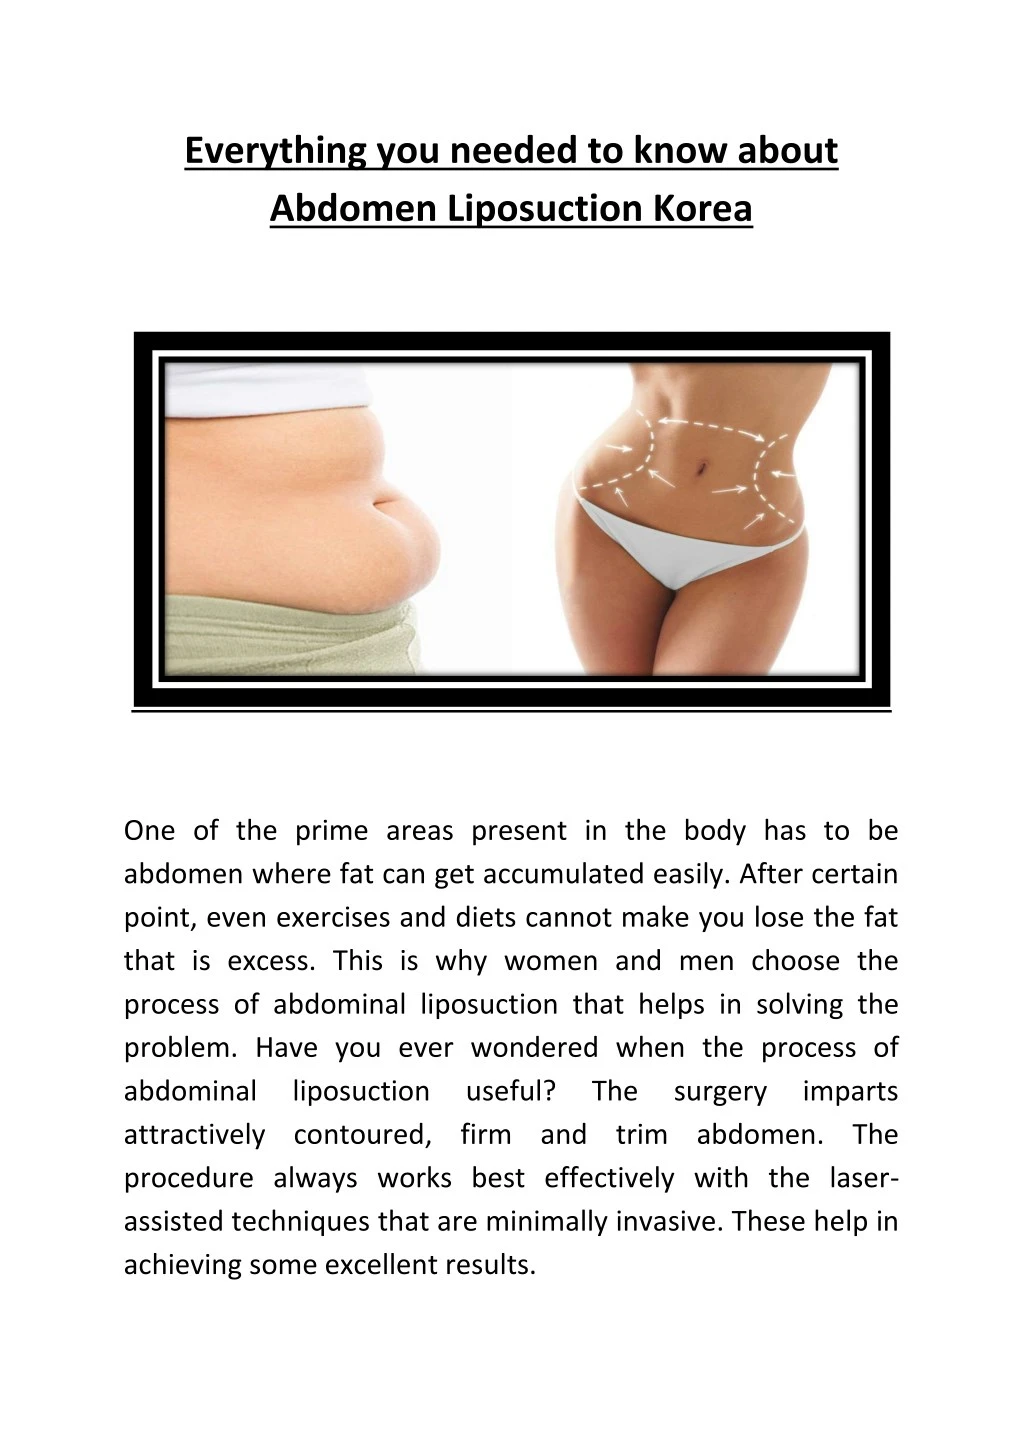 everything you needed to know about abdomen